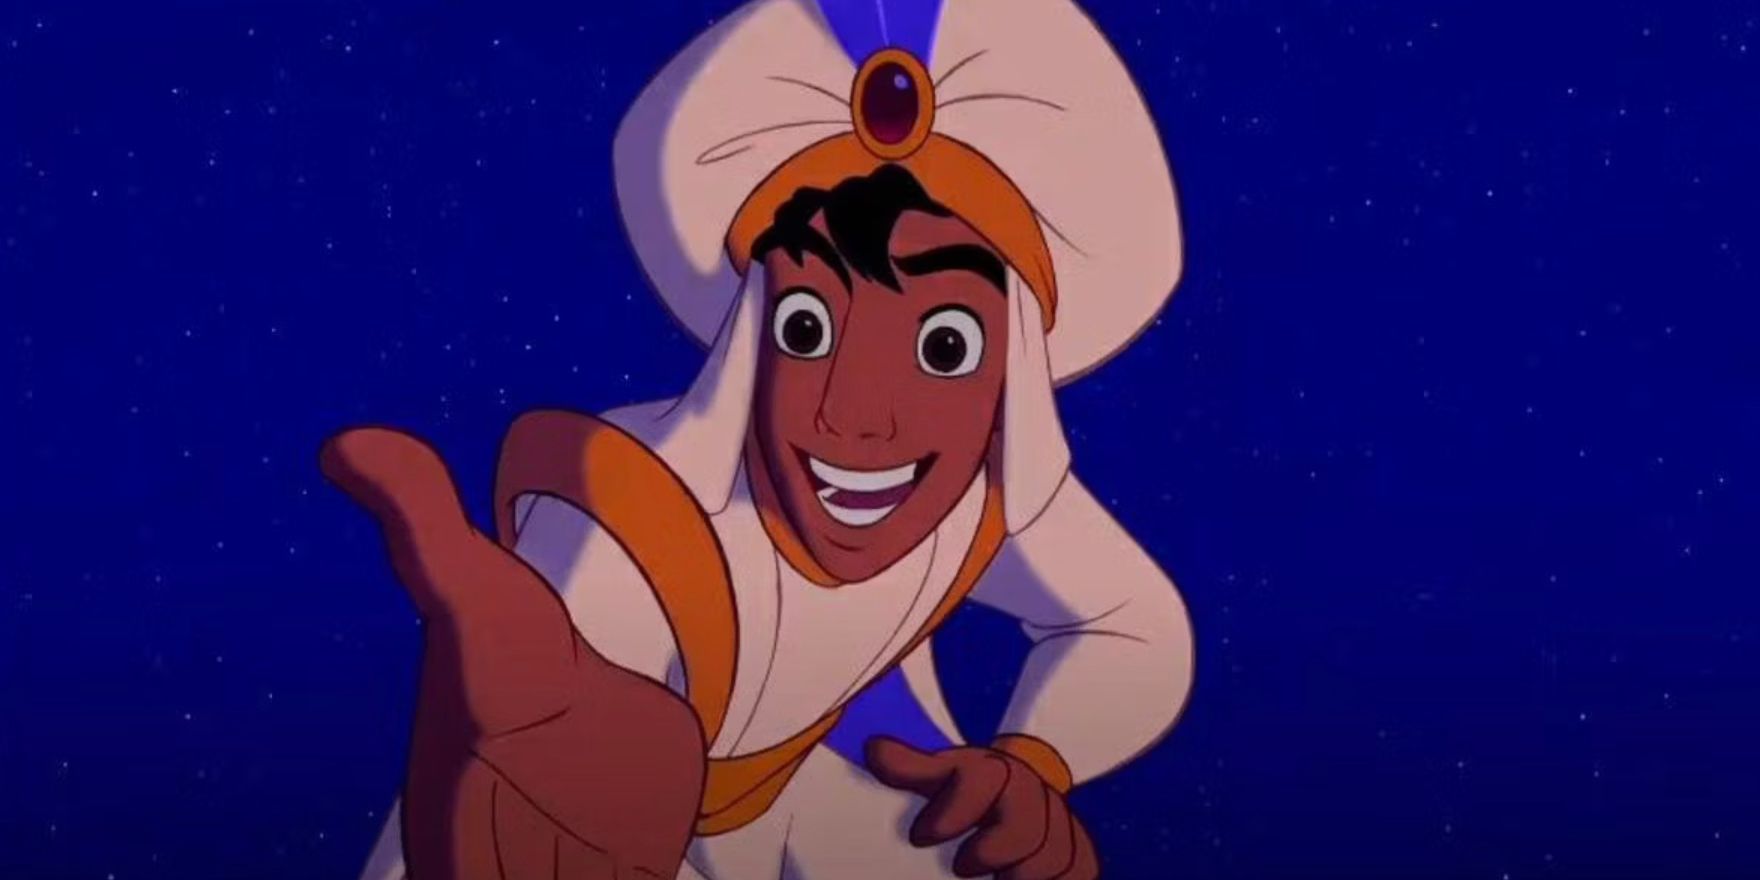 Scott Weinger as Aladdin extends his hand in the animated movie Aladdin